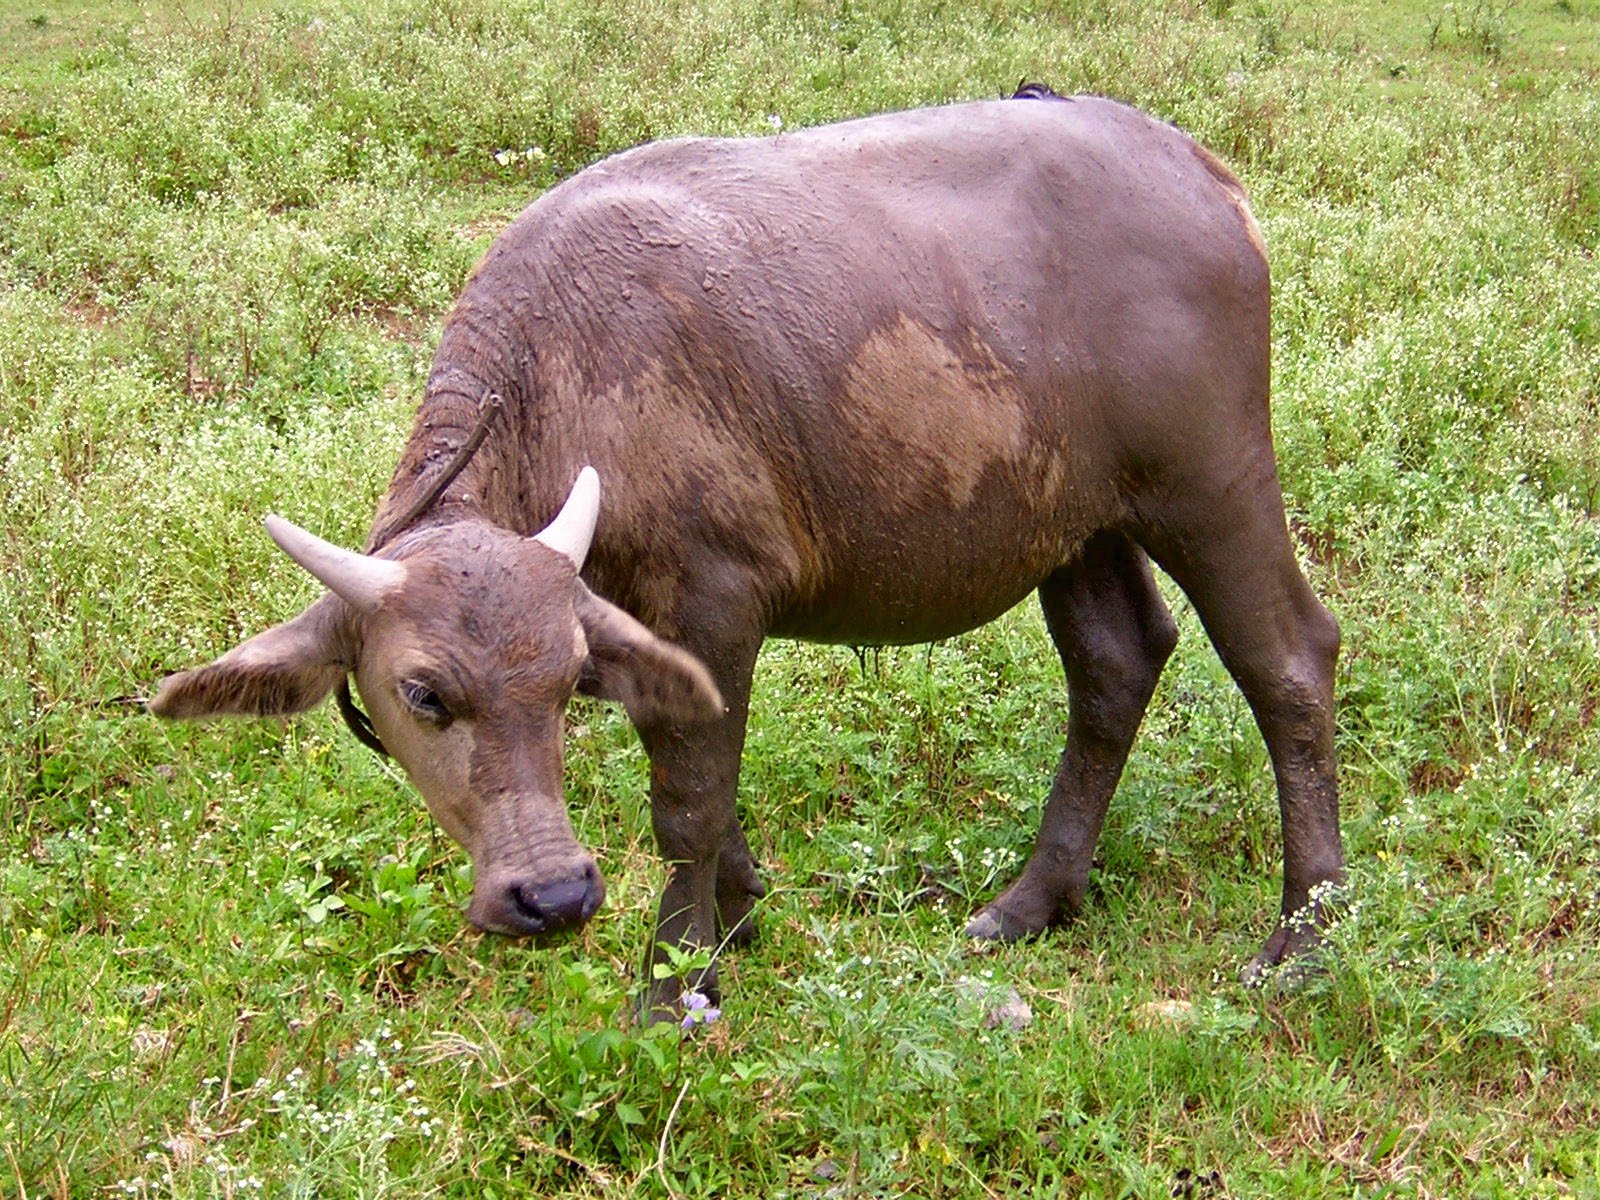 a large cow in an open field eating grass